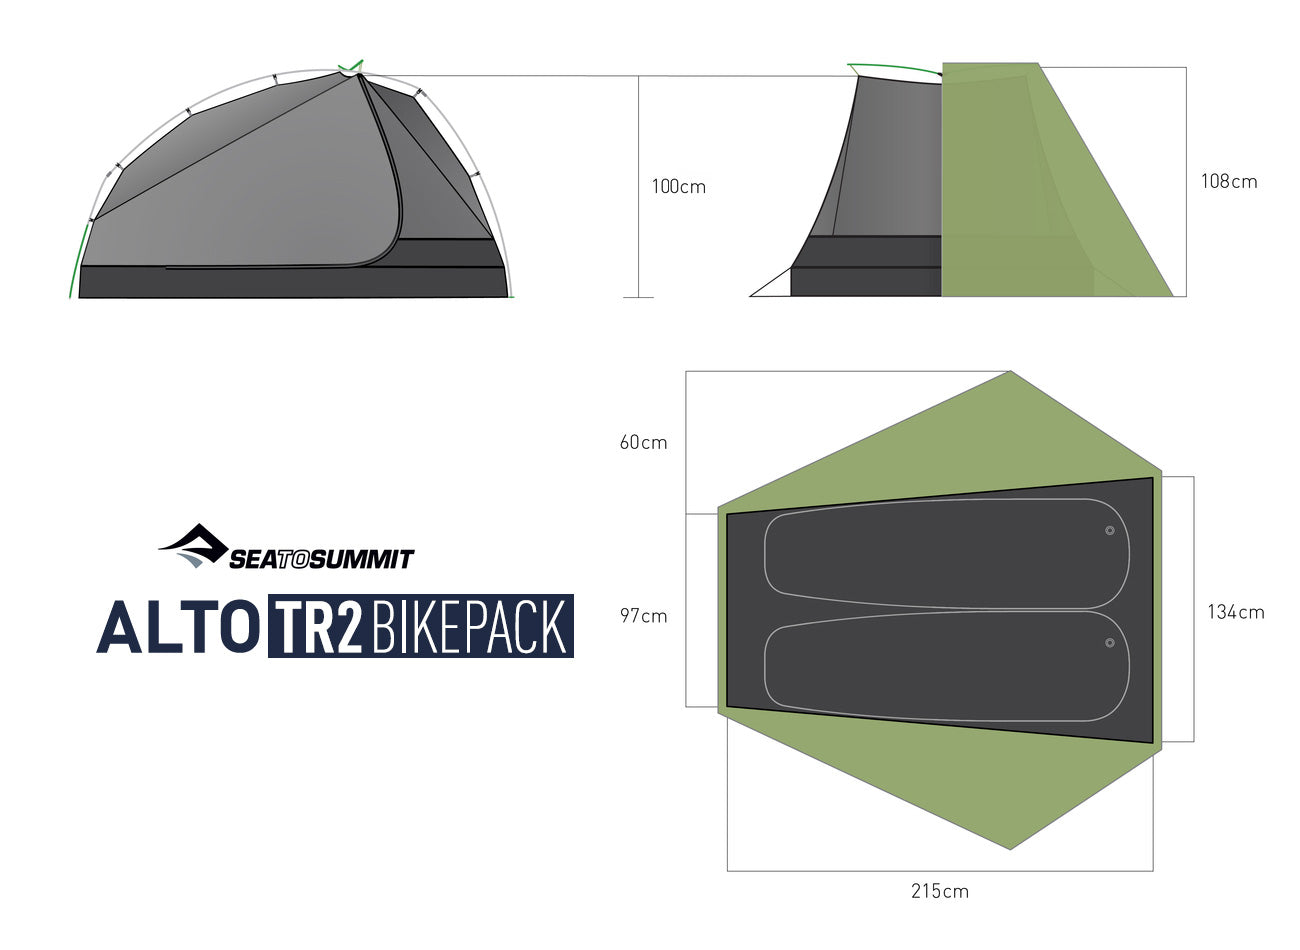 Alto TR2 Bikepack - Two Person Ultralight Bike Packing Tent